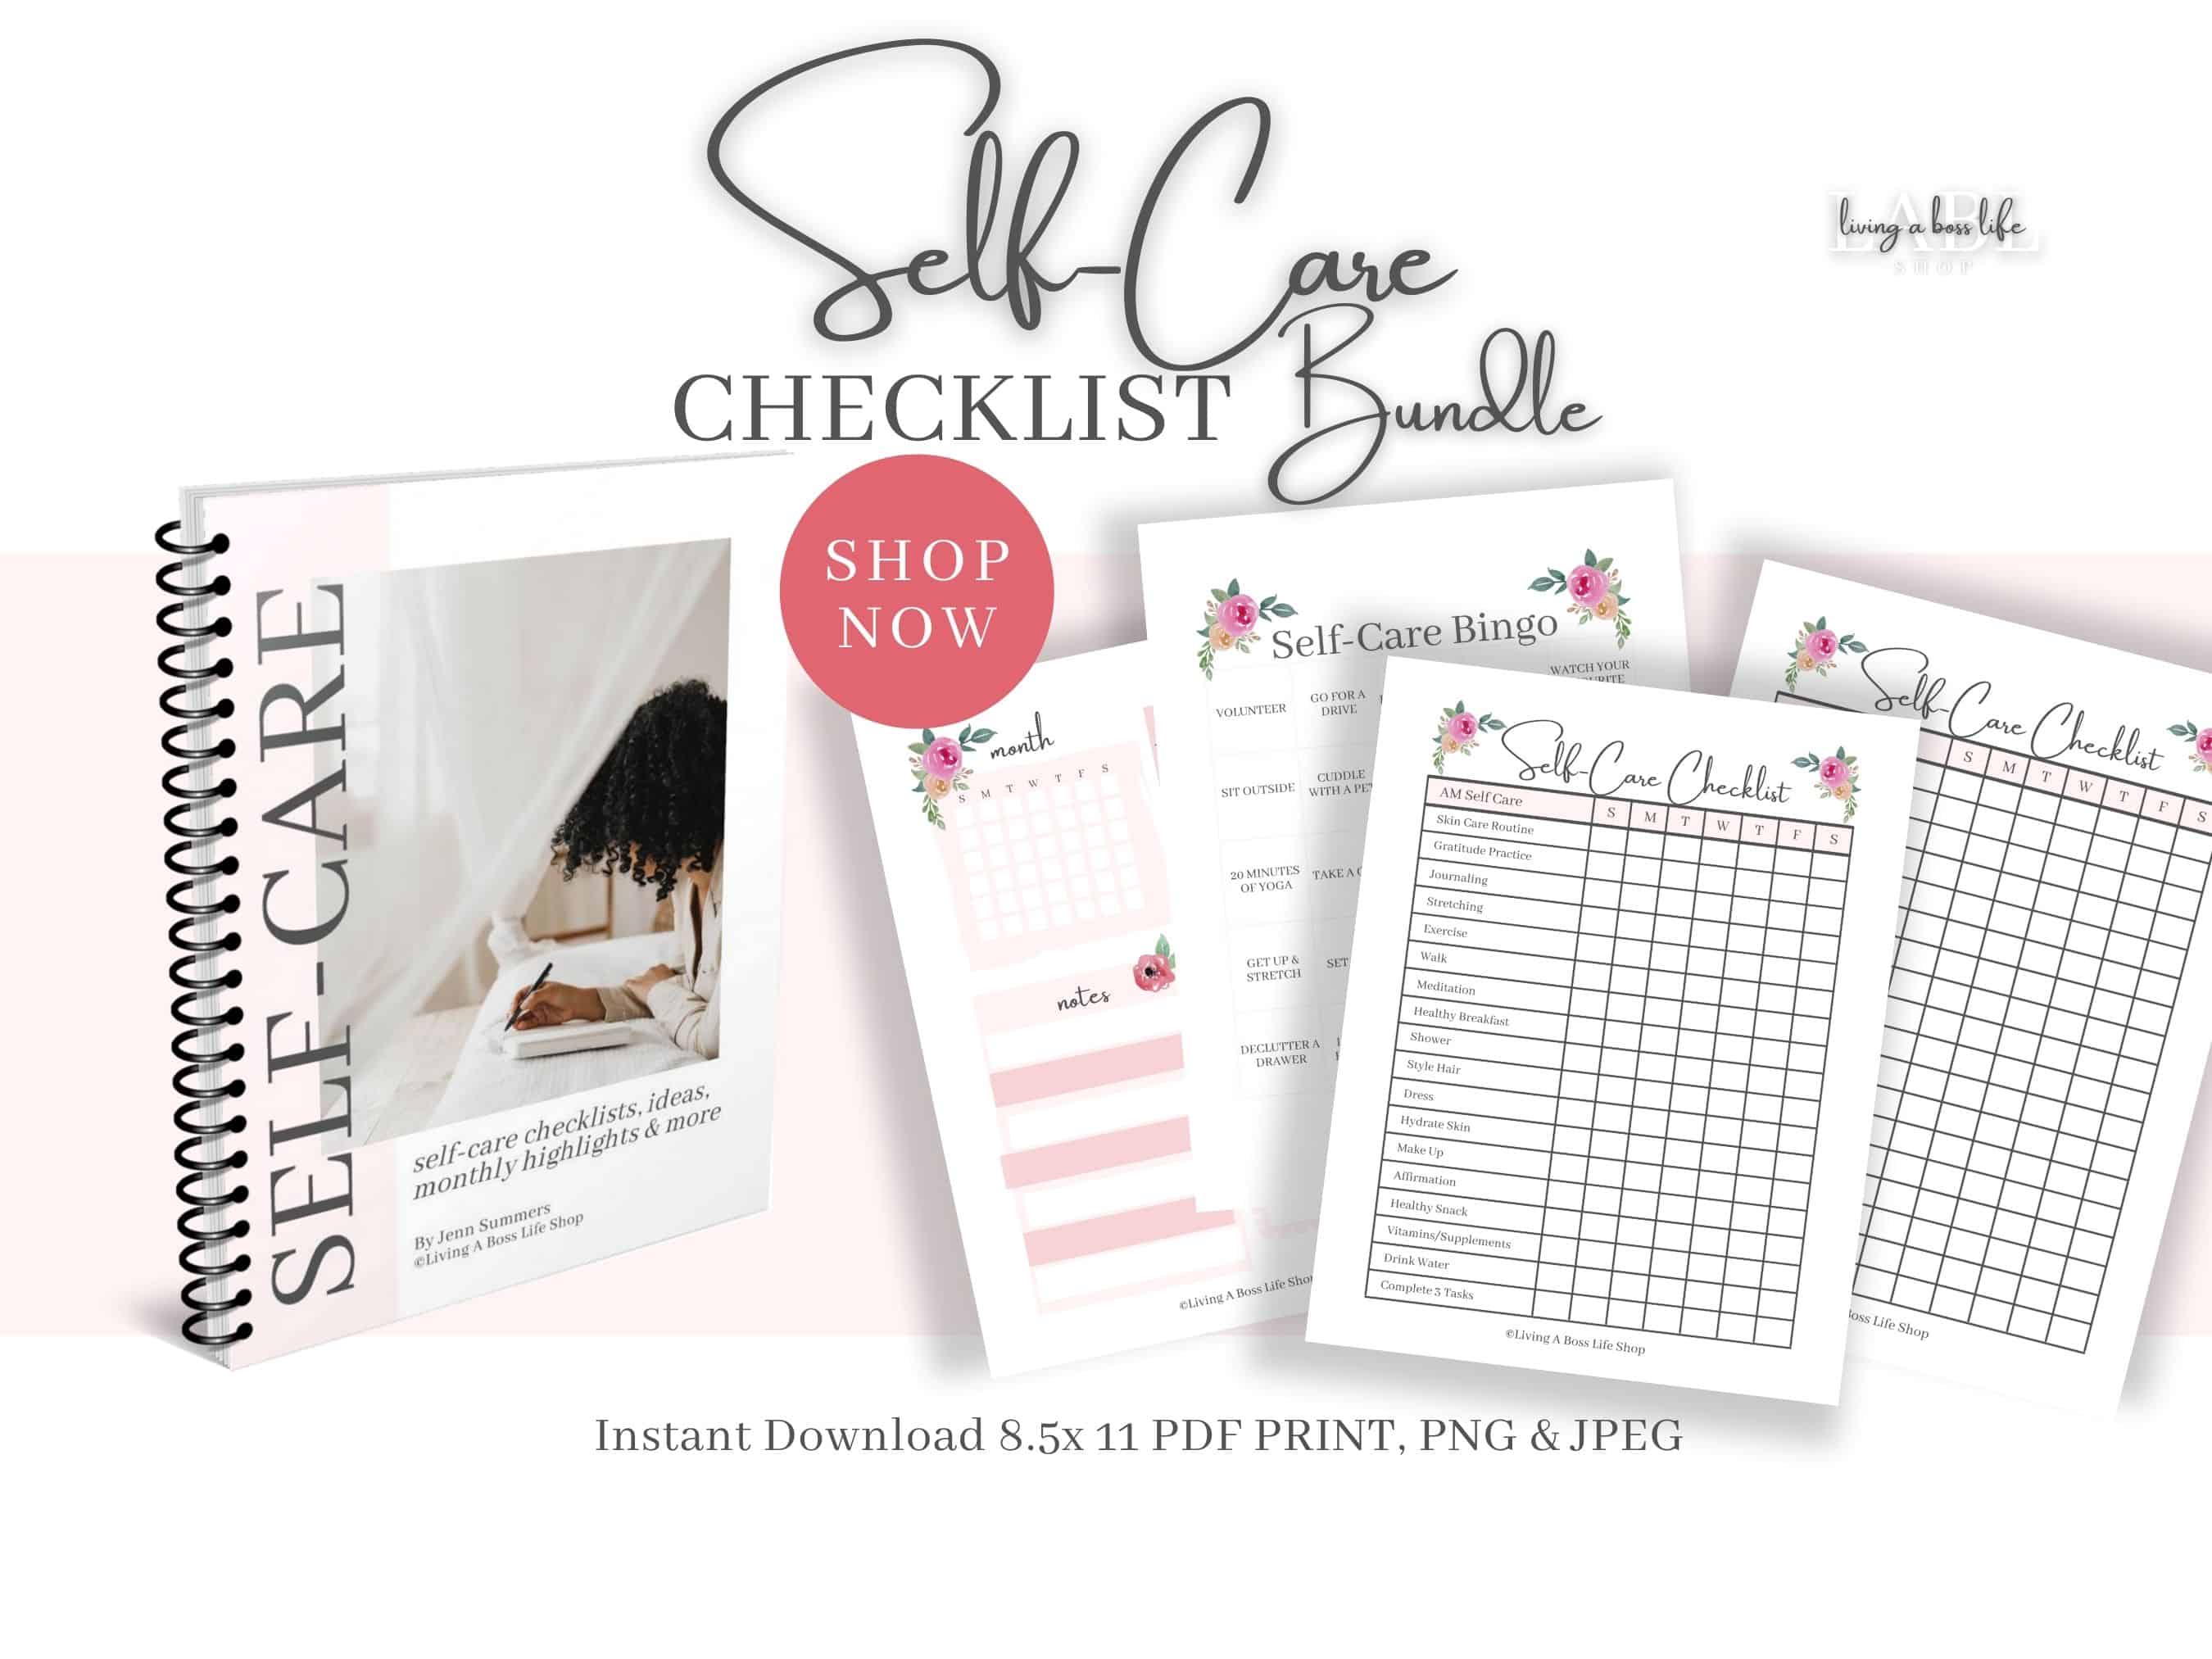 The Self-Care Checklist Bundle helps you stay on track of all your daily self-care routine on an easy-to-use checklist! Make self-care Sunday a part of your everyday self-care with these weekly self-care checklists.Create new healthy habits today! #SelfCare #SelfCareTracker #PrintableSelfCareChecklist #SelfCareRoutine #HealthyRoutine #SelfLove